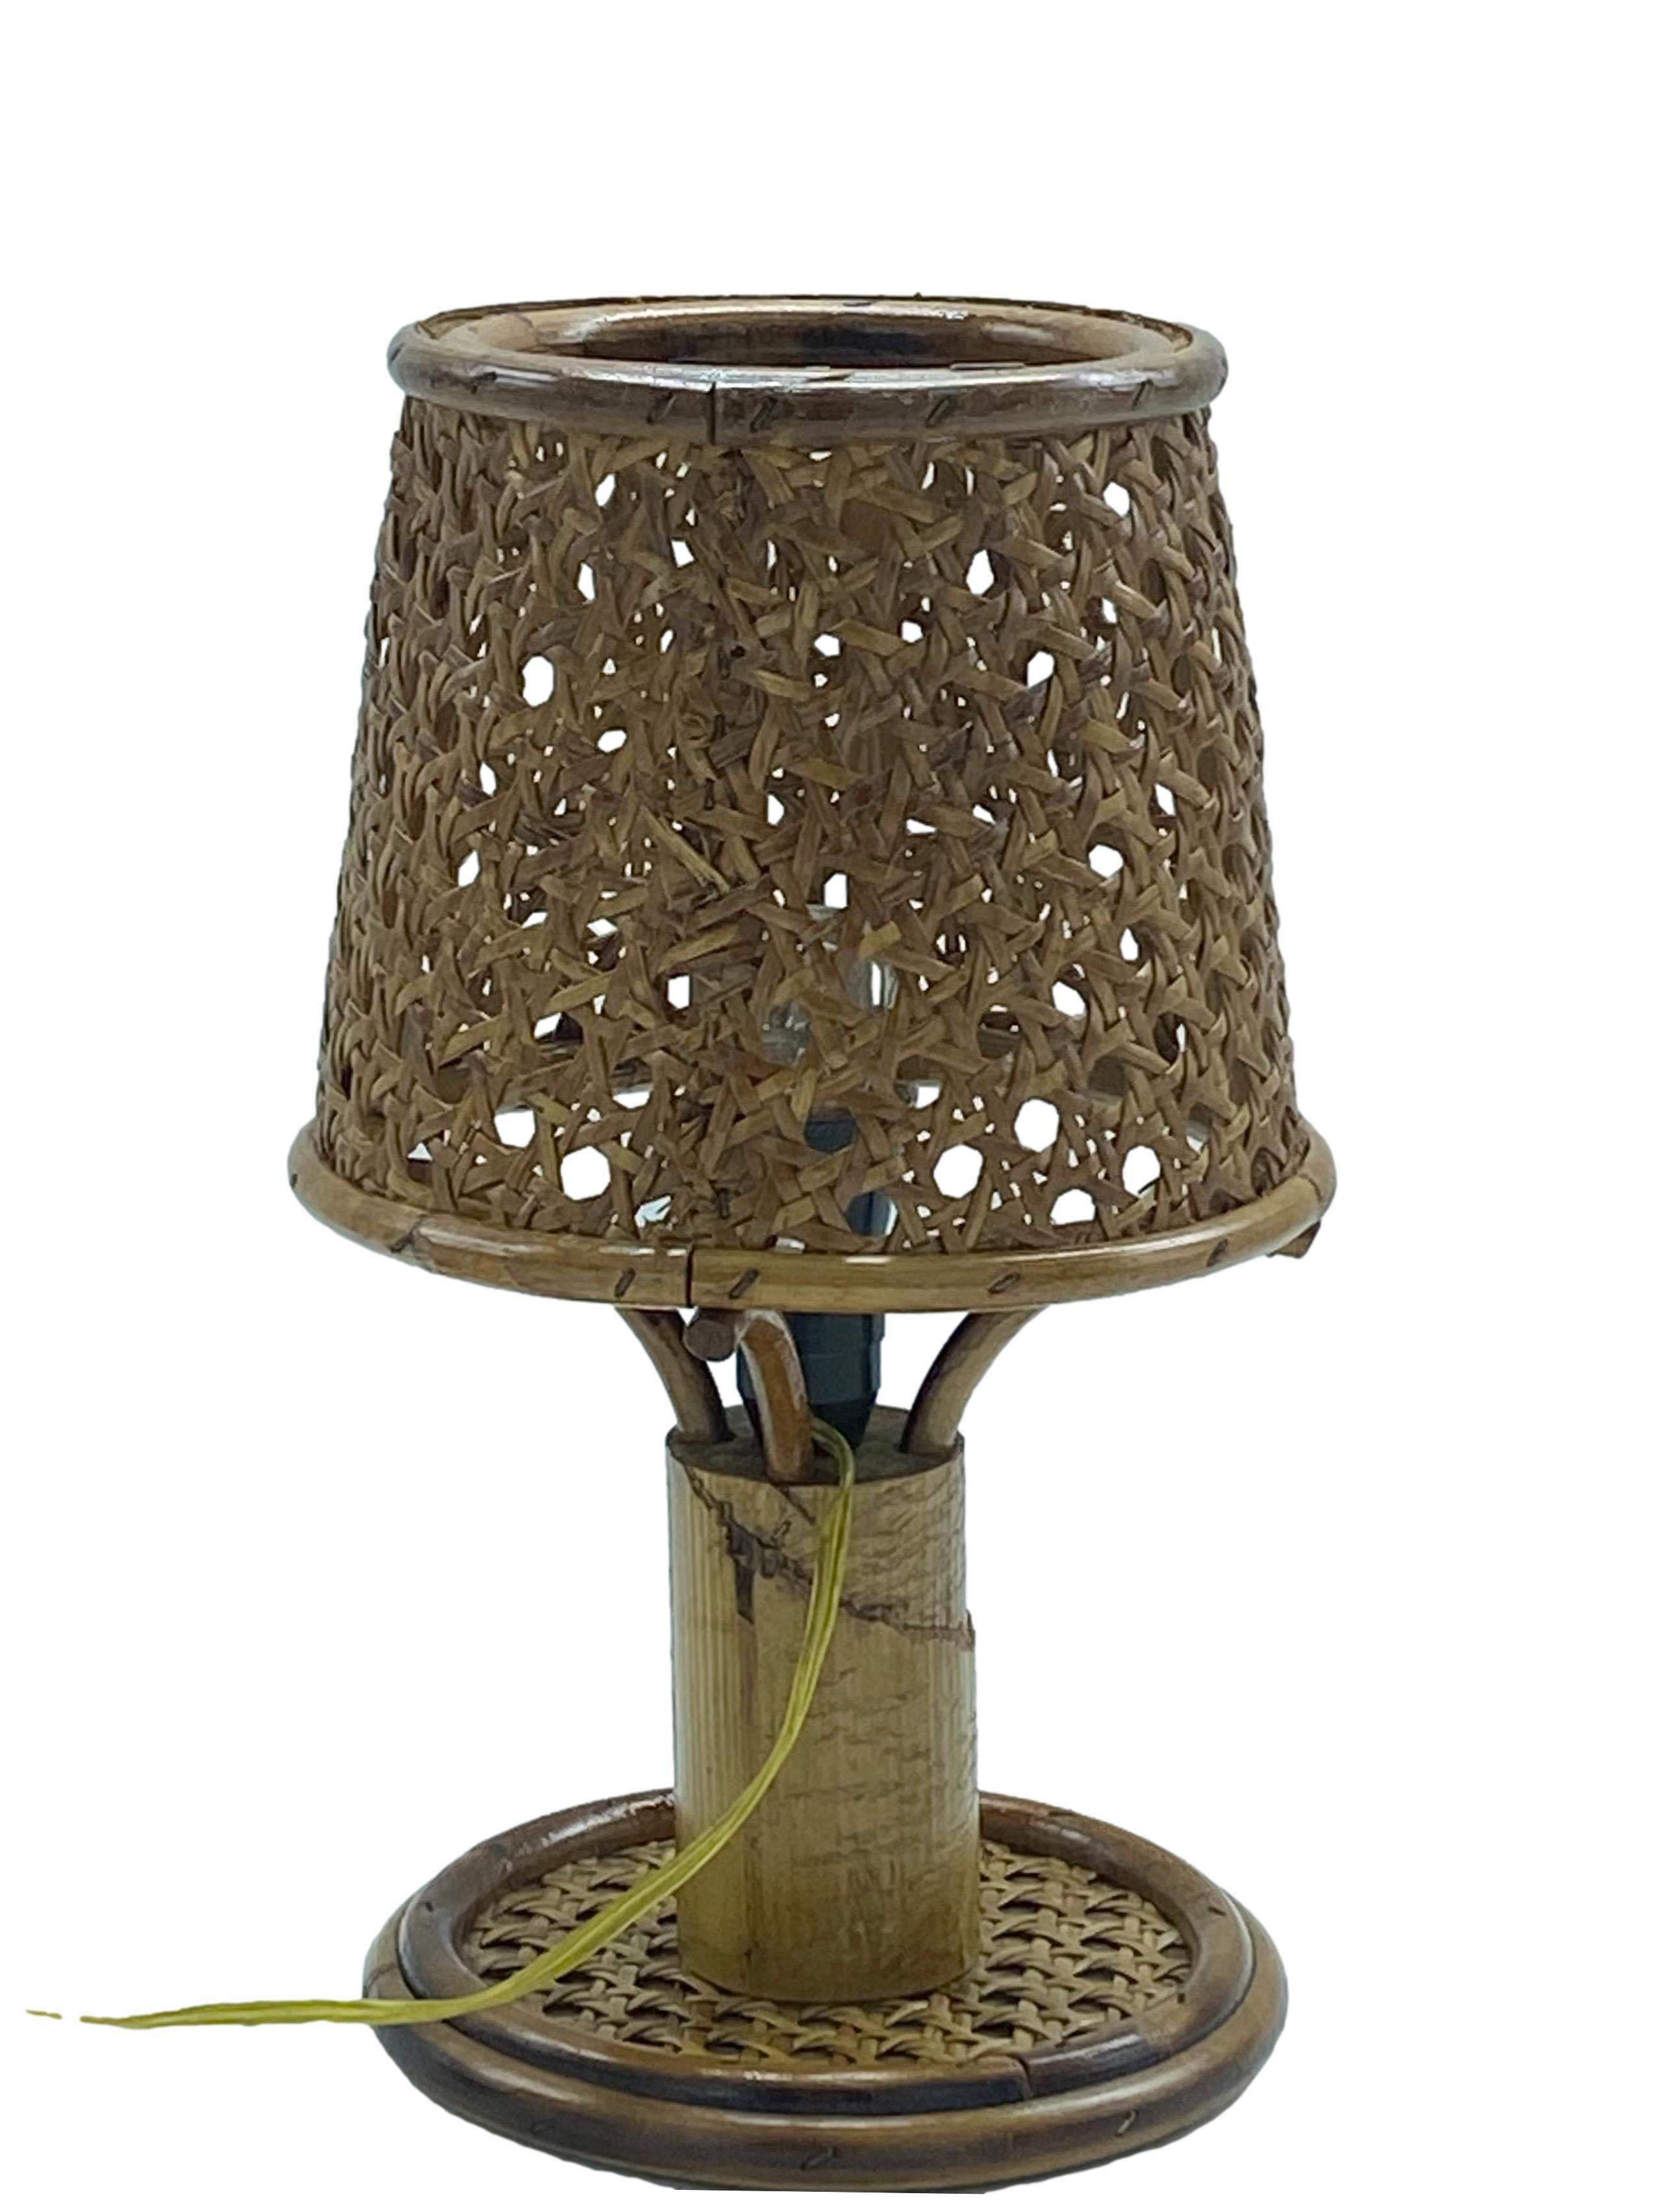 Delightful little table or bedside lamp made from bamboo and rattan. The shade is made of Viennese mesh, while the base shows a rattan and bamboo construction. 
 